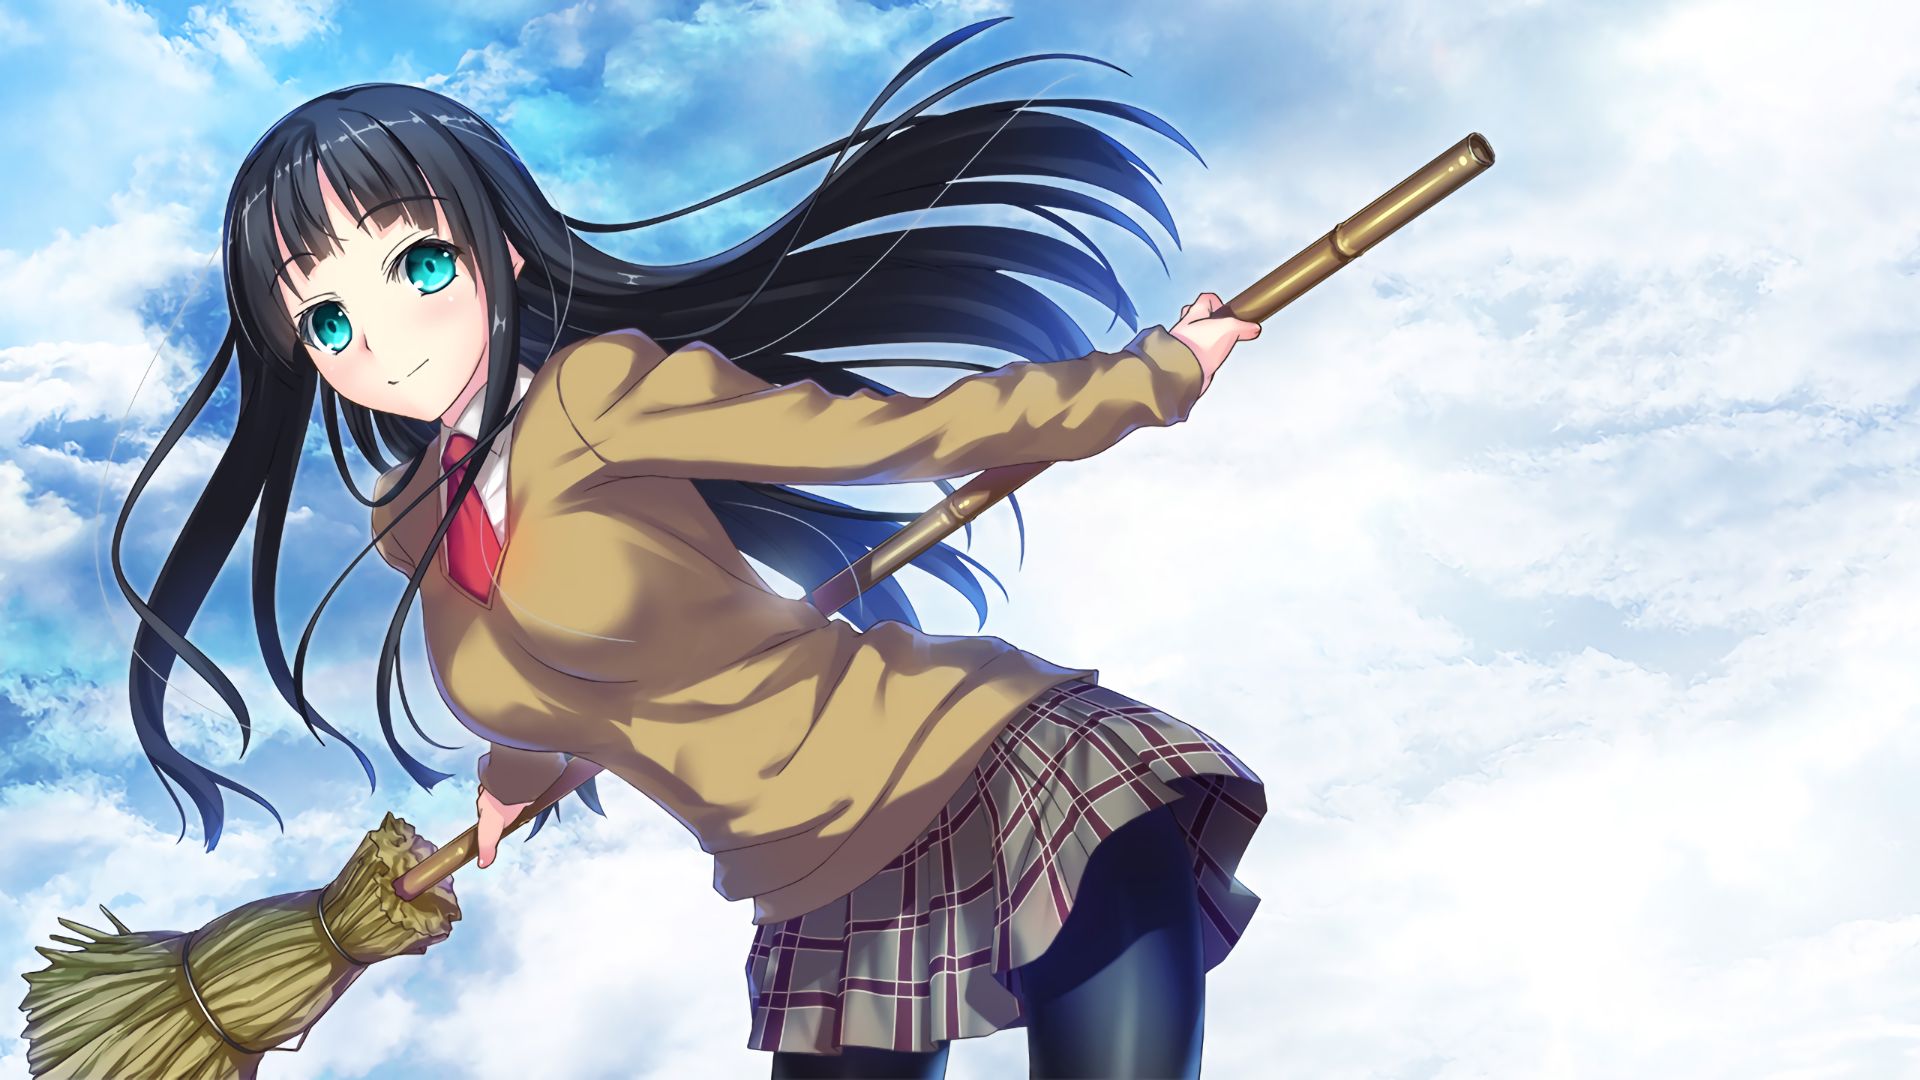 Anime Girl Flying With Umbrella In The Sky Live Wallpaper - MoeWalls